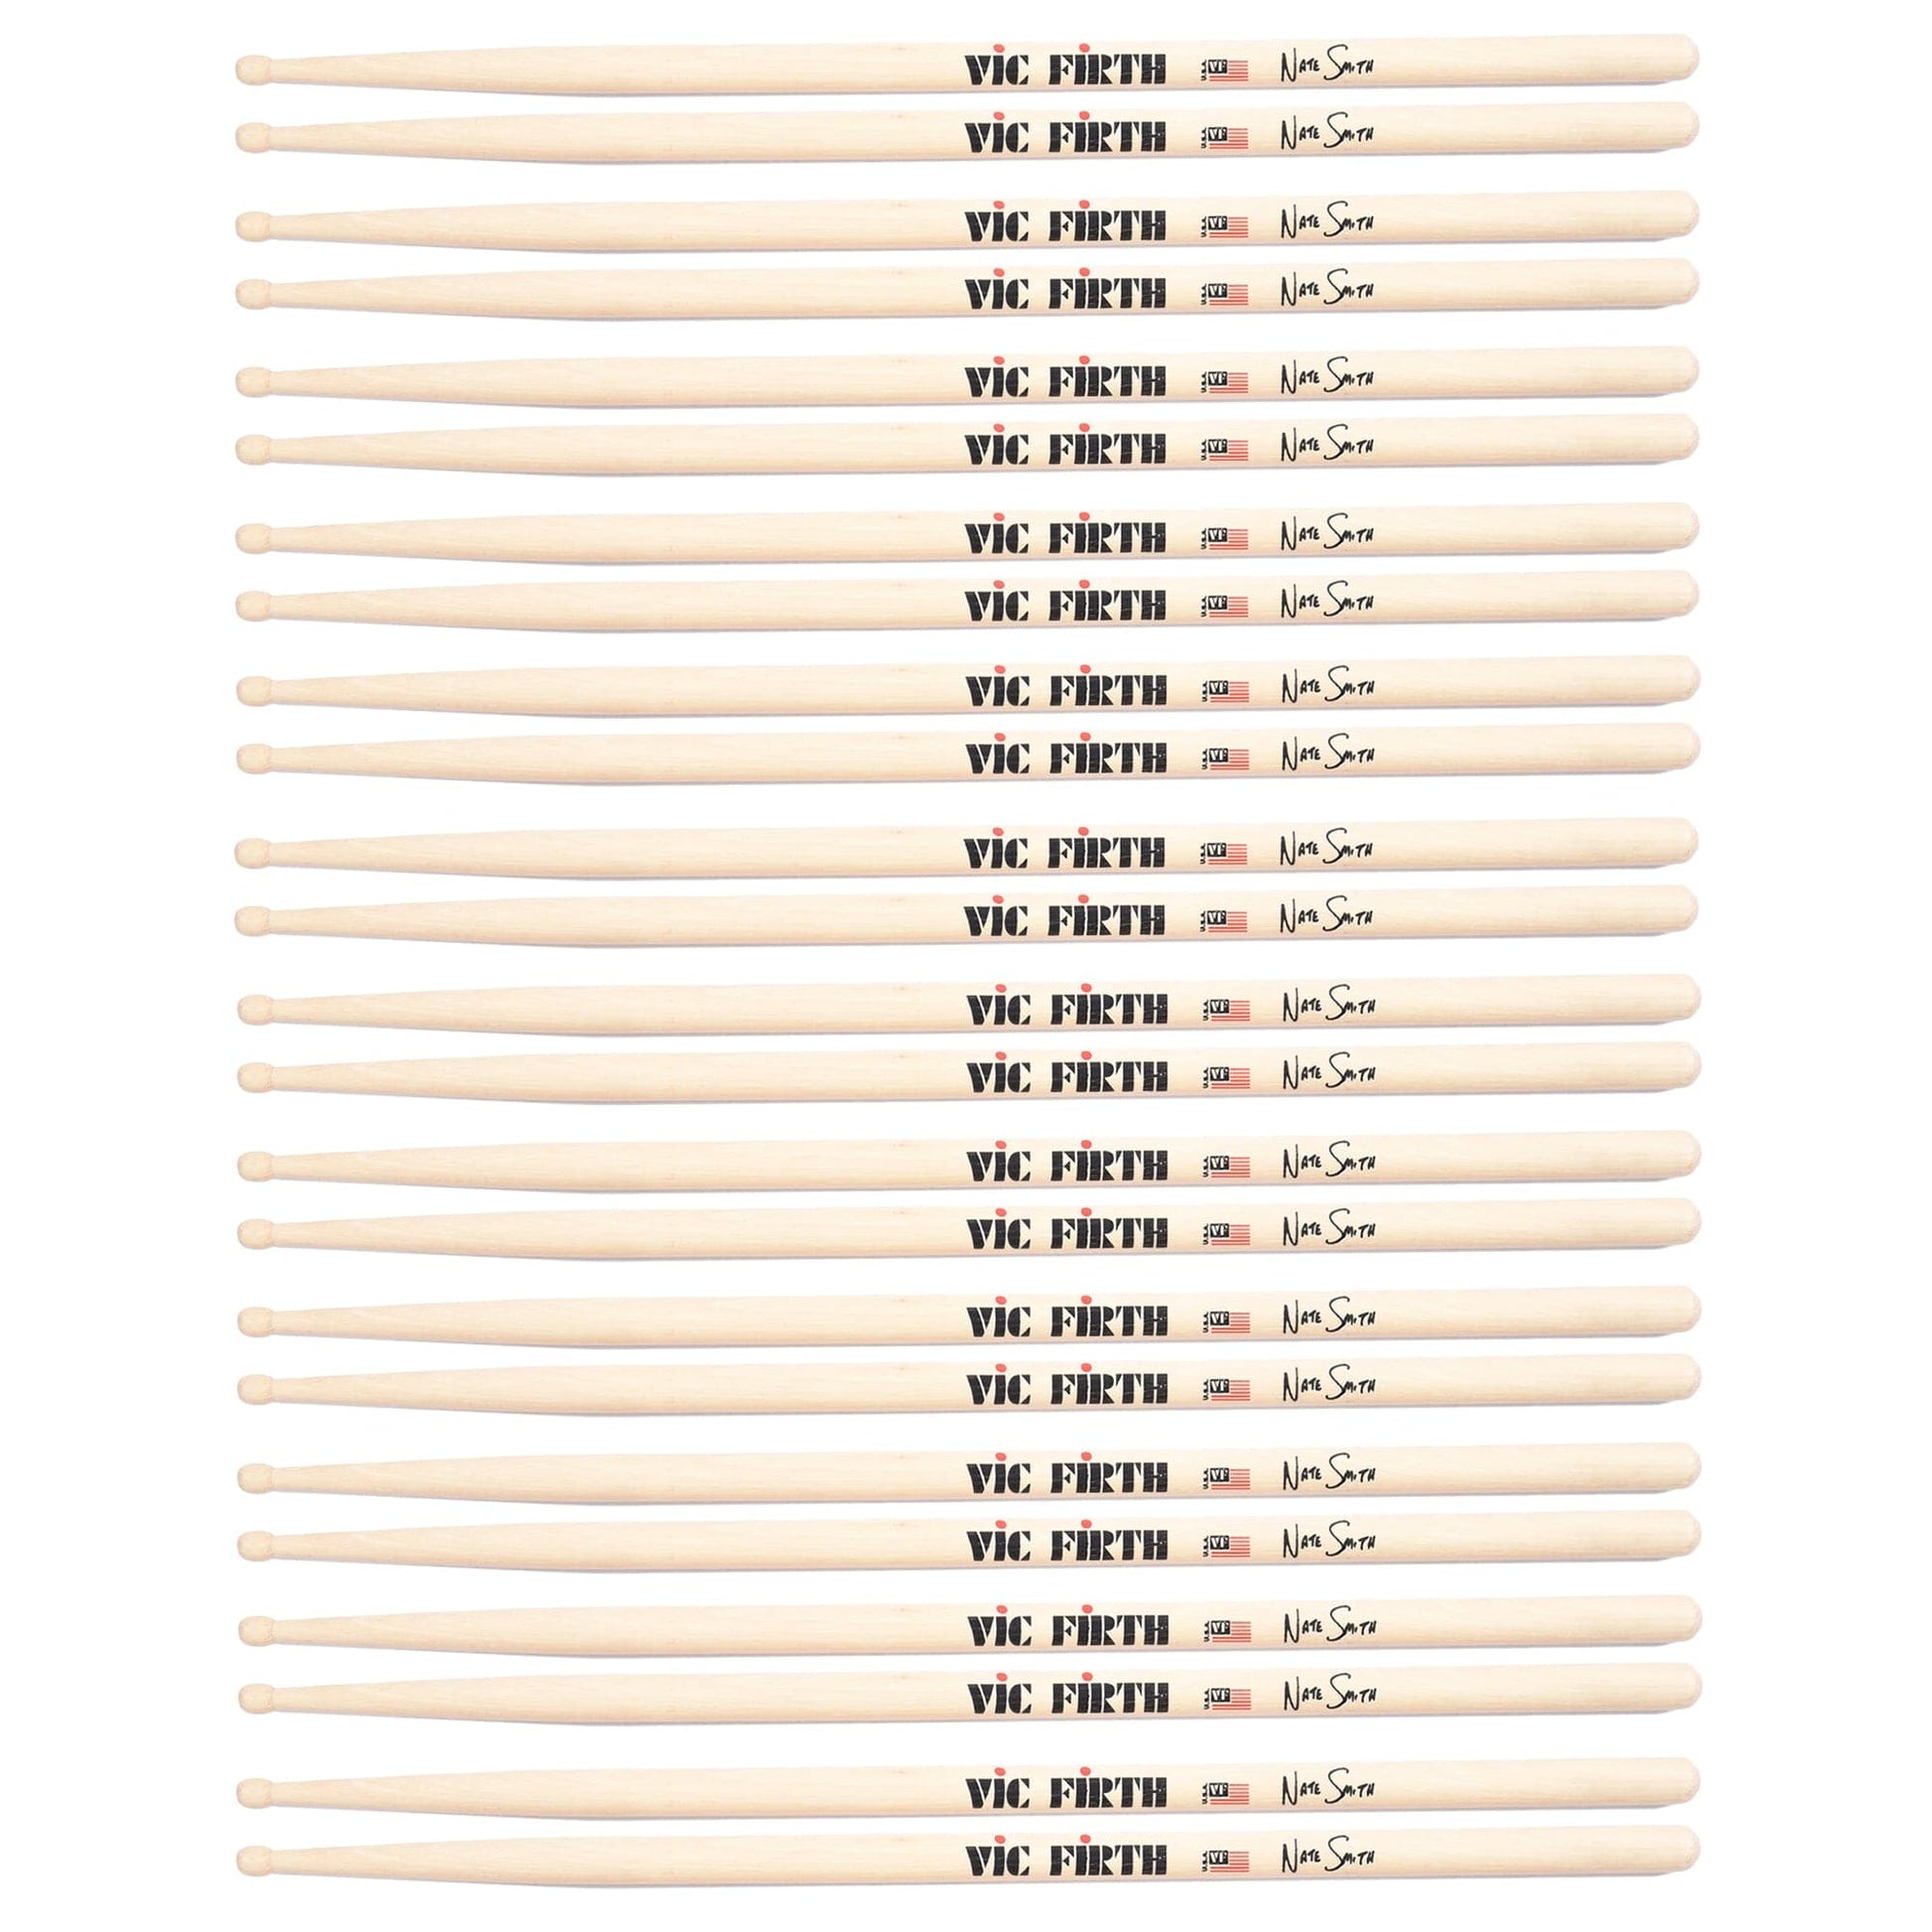 Vic Firth Nate Smith Signature Drum Sticks 12 Pack Bundle Drums and Percussion / Parts and Accessories / Drum Sticks and Mallets